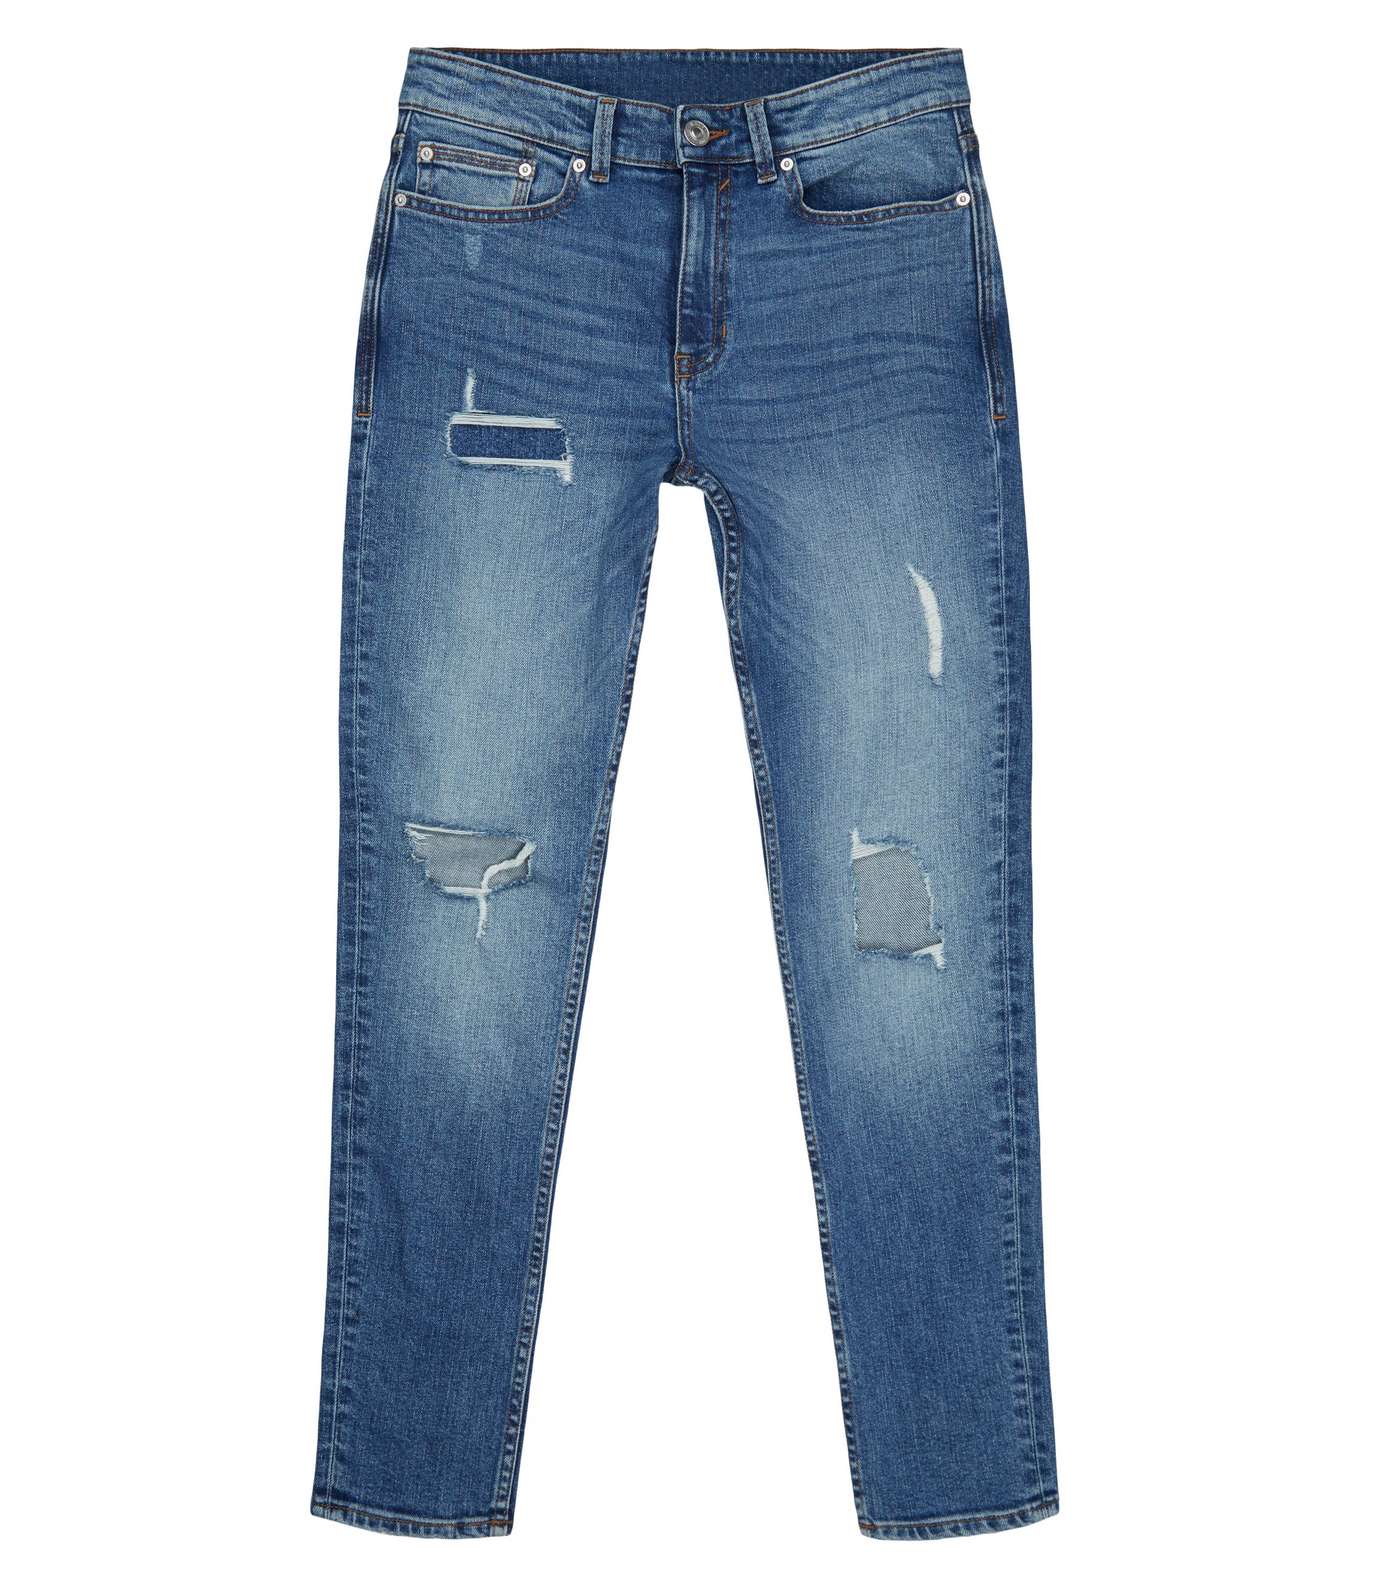 Blue Rinse Wash Ripped Skinny Stretch Jeans Image 4